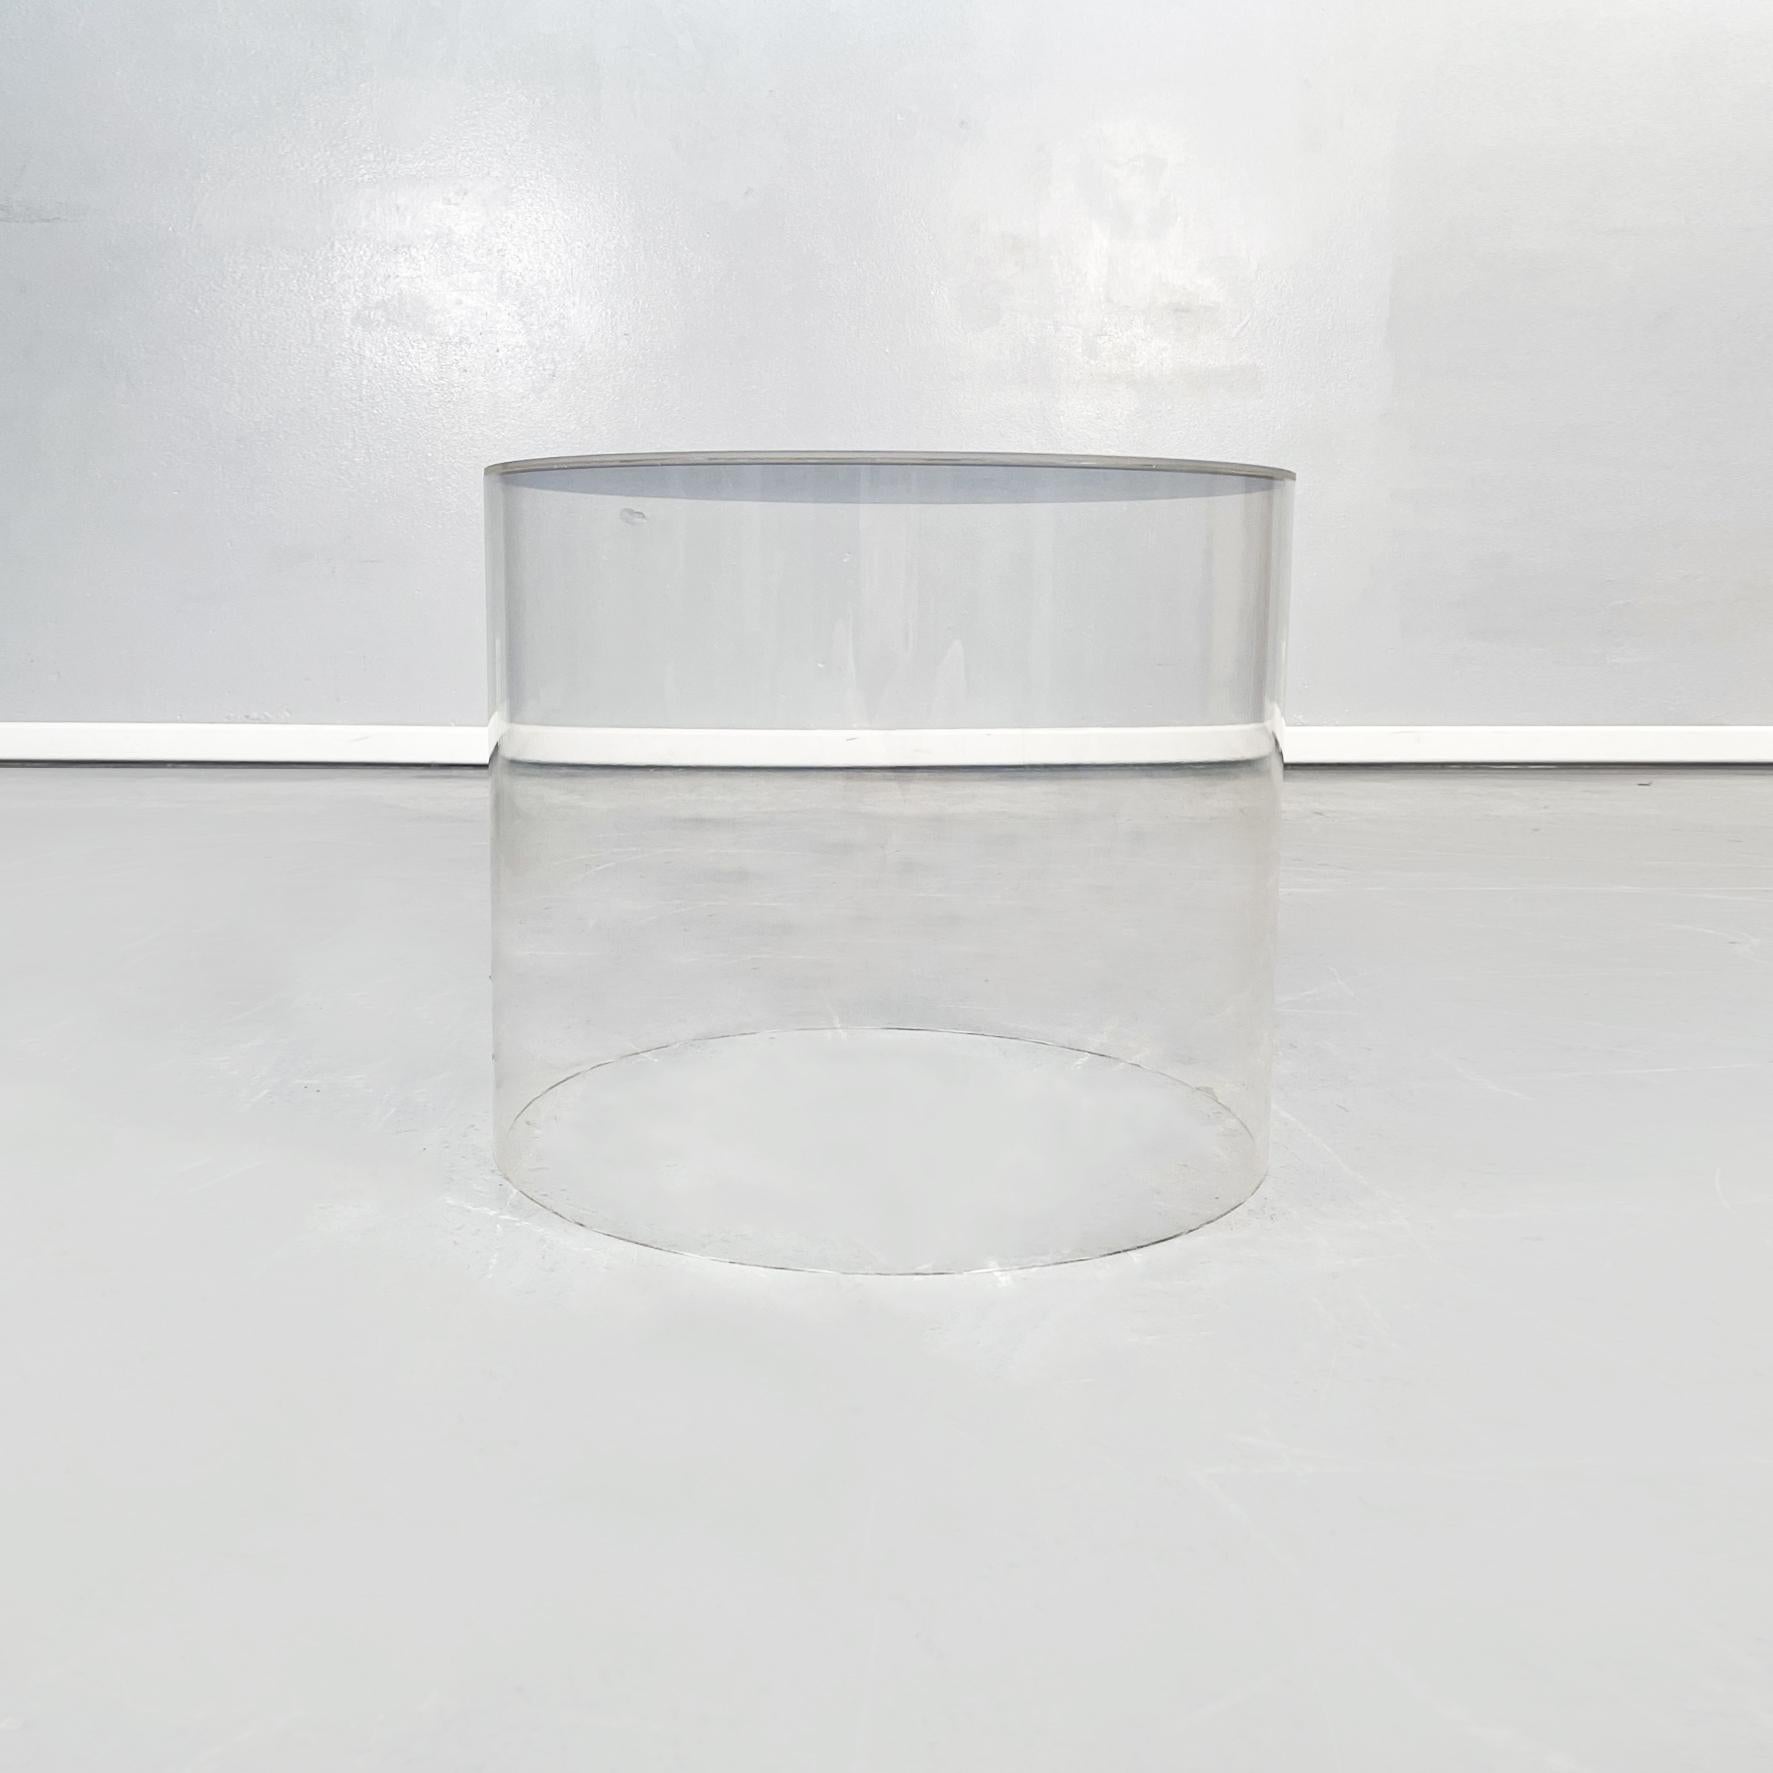 Contemporary Italian Post-Modern Cylindrical Coffee Tables in Grey and Blue Plexiglass, 2000s For Sale